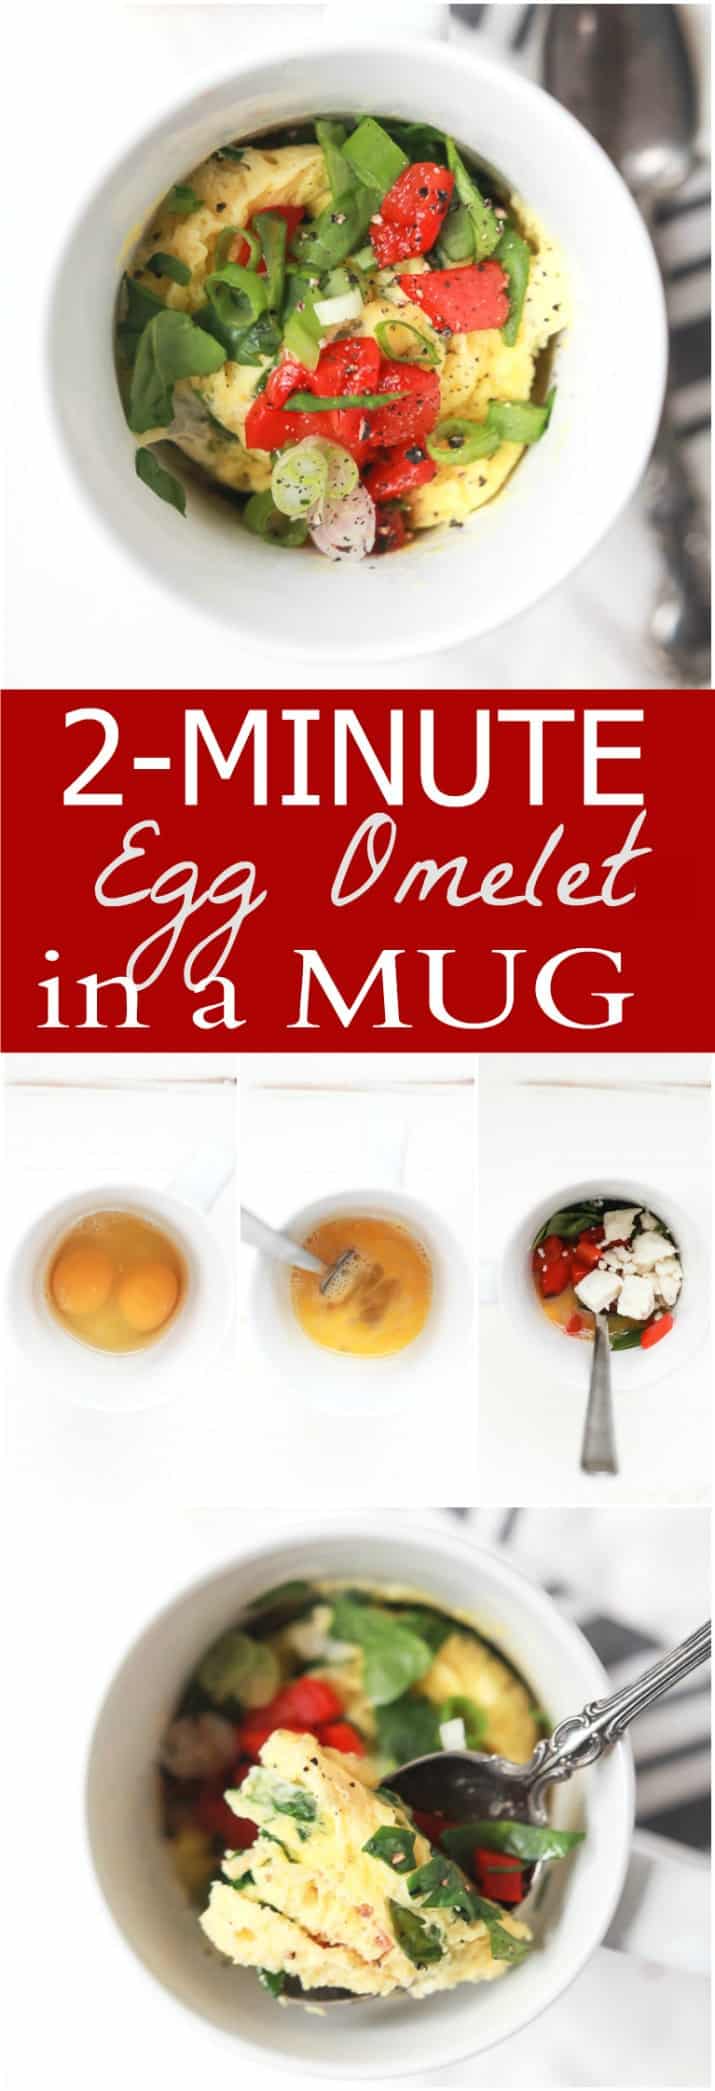 A great breakfast recipe for a healthy New Year! 2 Minute Egg Omelet in a Mug, low in calories, filled with nutrients, easy to "make your own" and all made in one cup! | joyfulhealthyeats.com #glutenfree